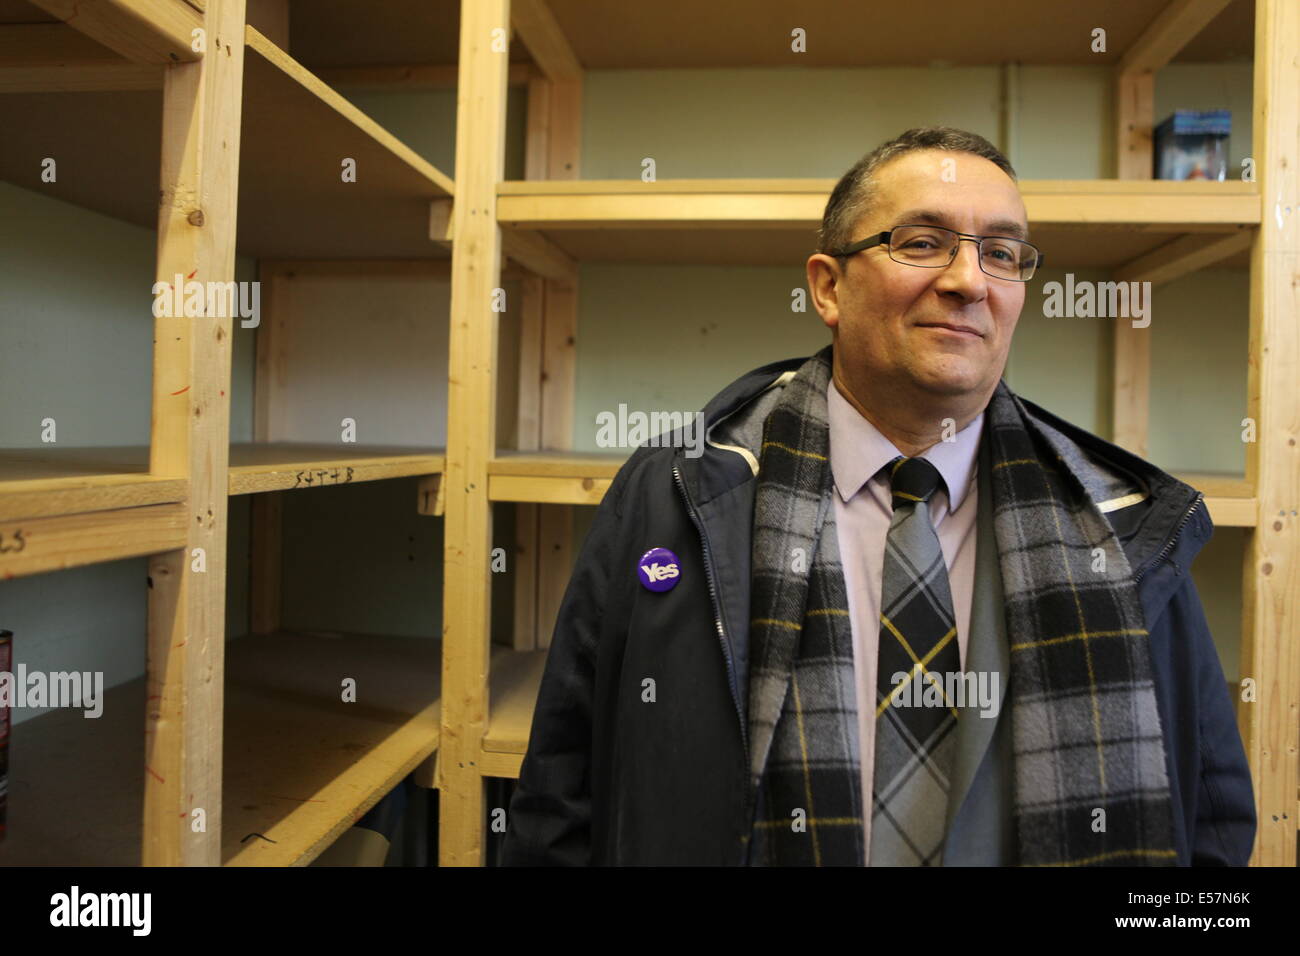 French SNP (Scottish National Party) MsP Christian Allard at an empty food bank in Aberdeen. Gap between rich and poor increases Stock Photo